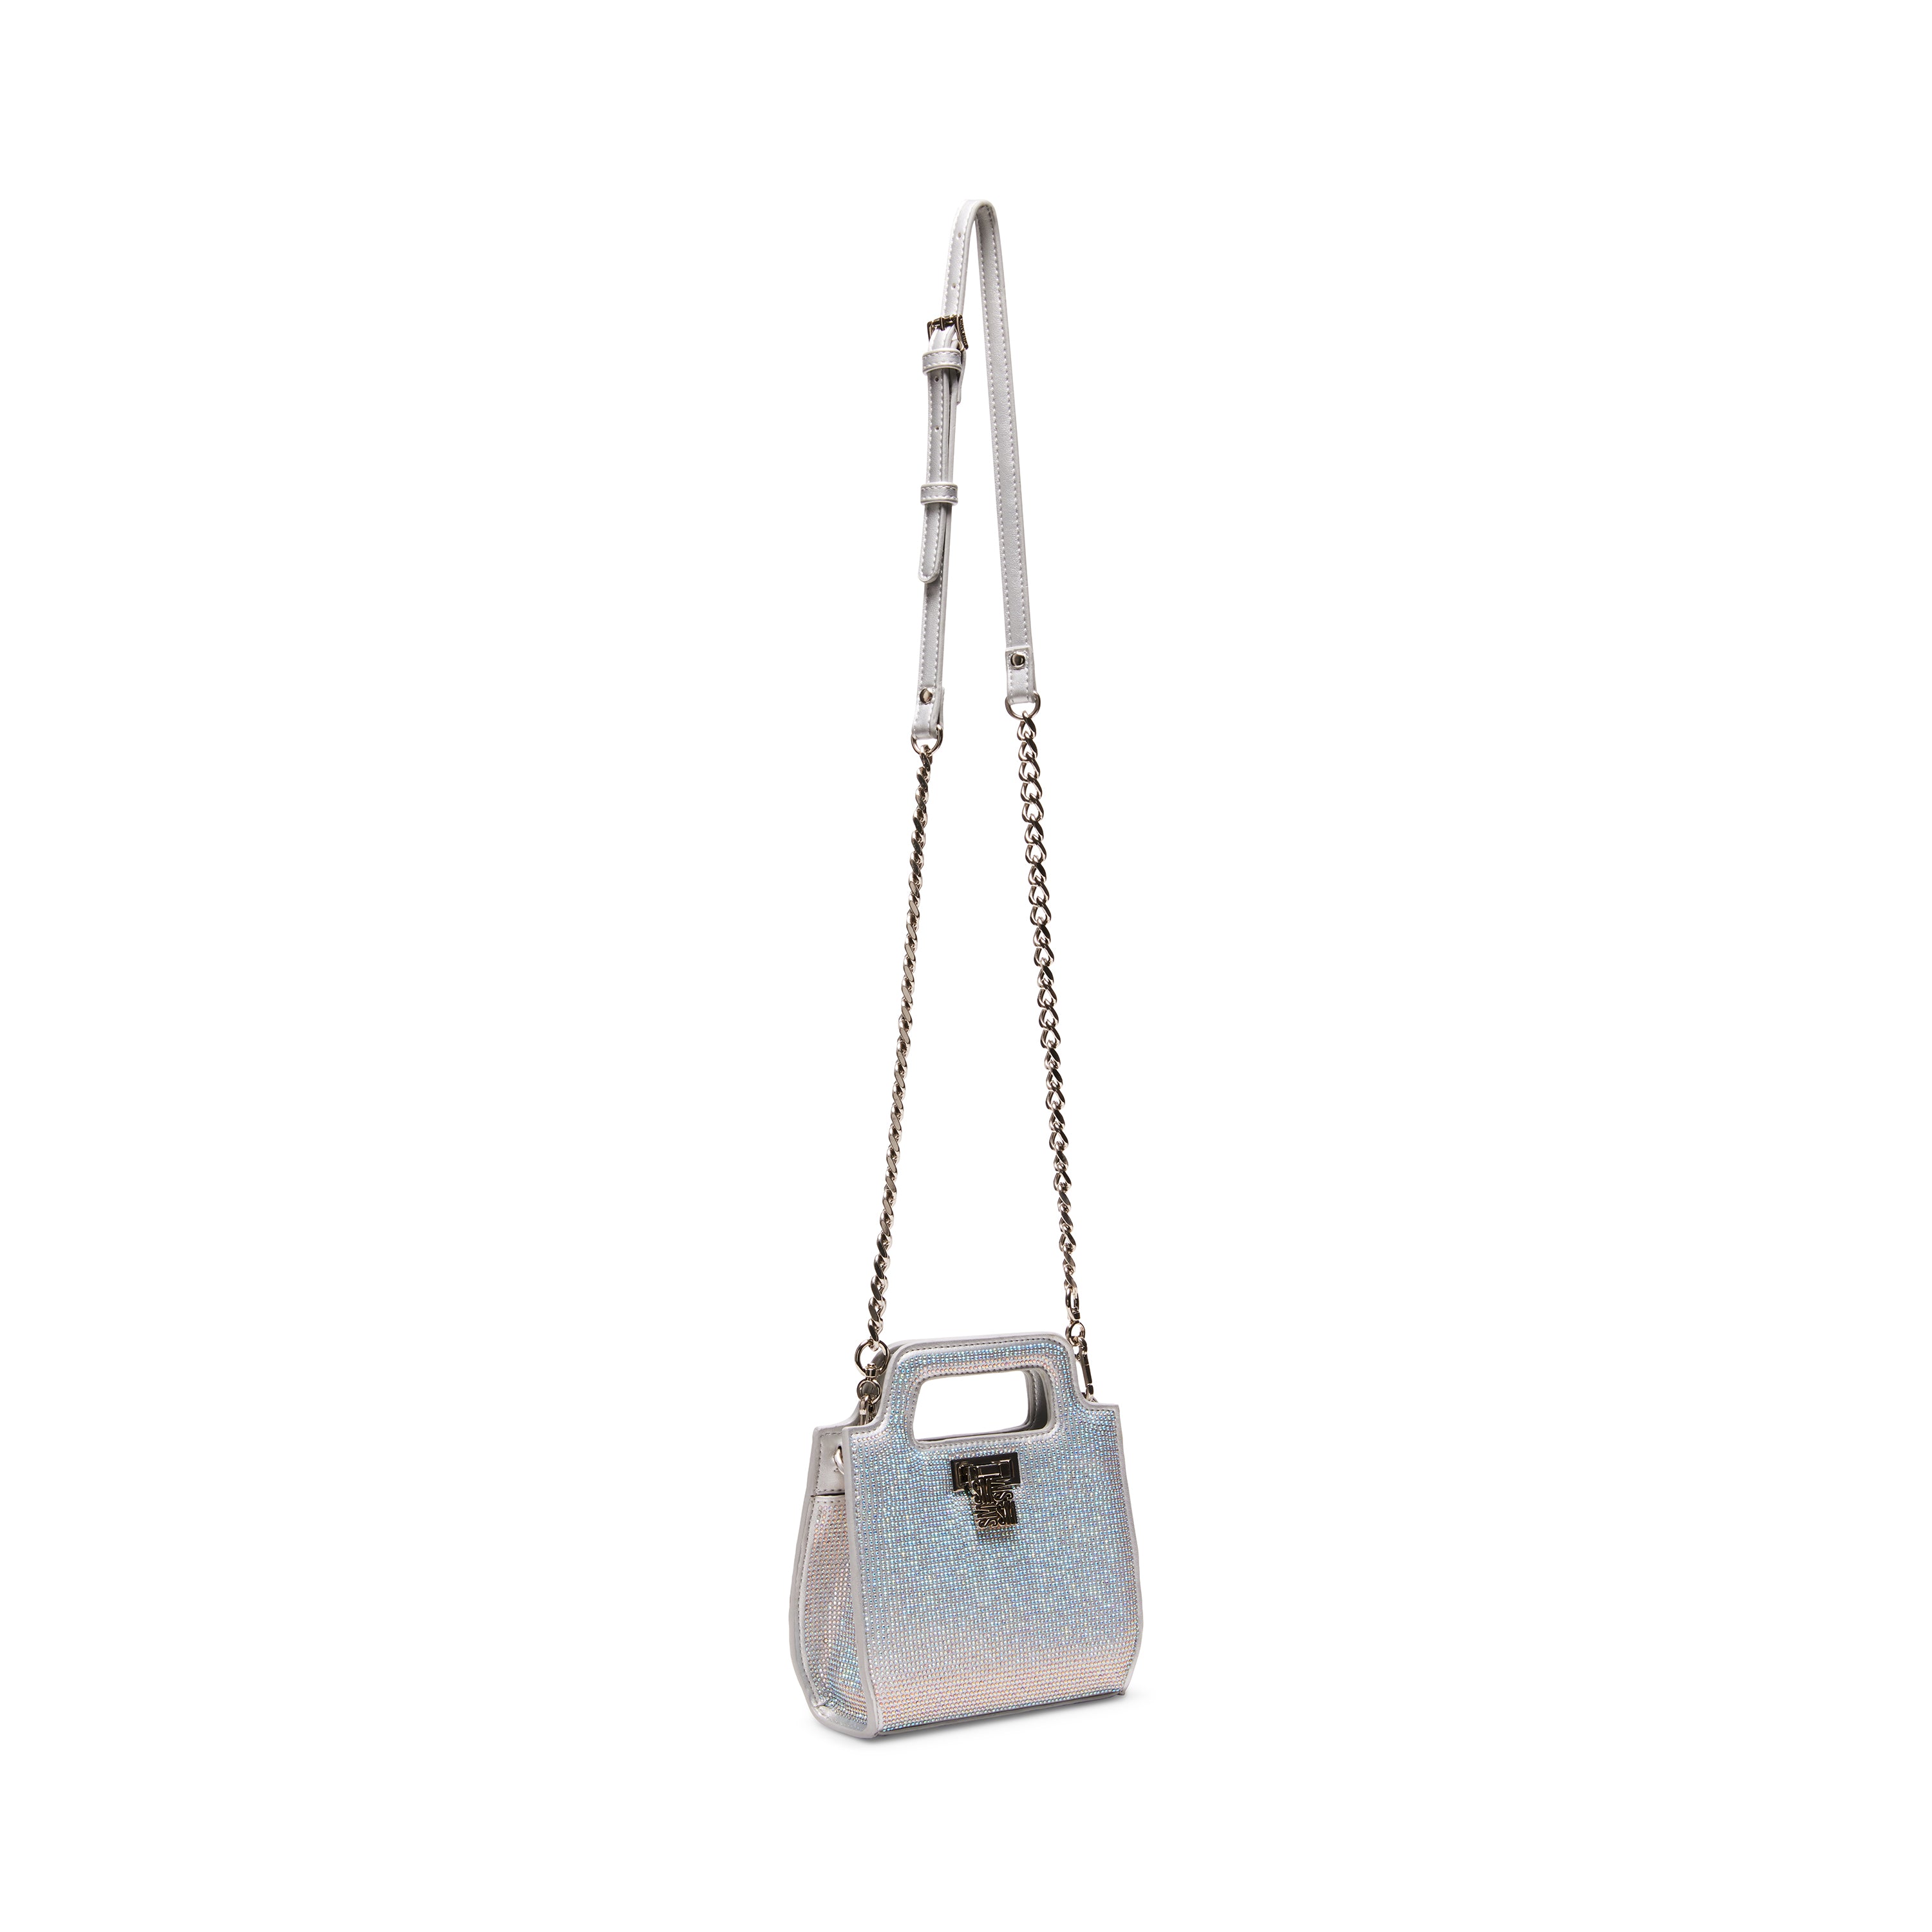 BSTEALTH SILVER TOP HANDLE BAG- Hover Image